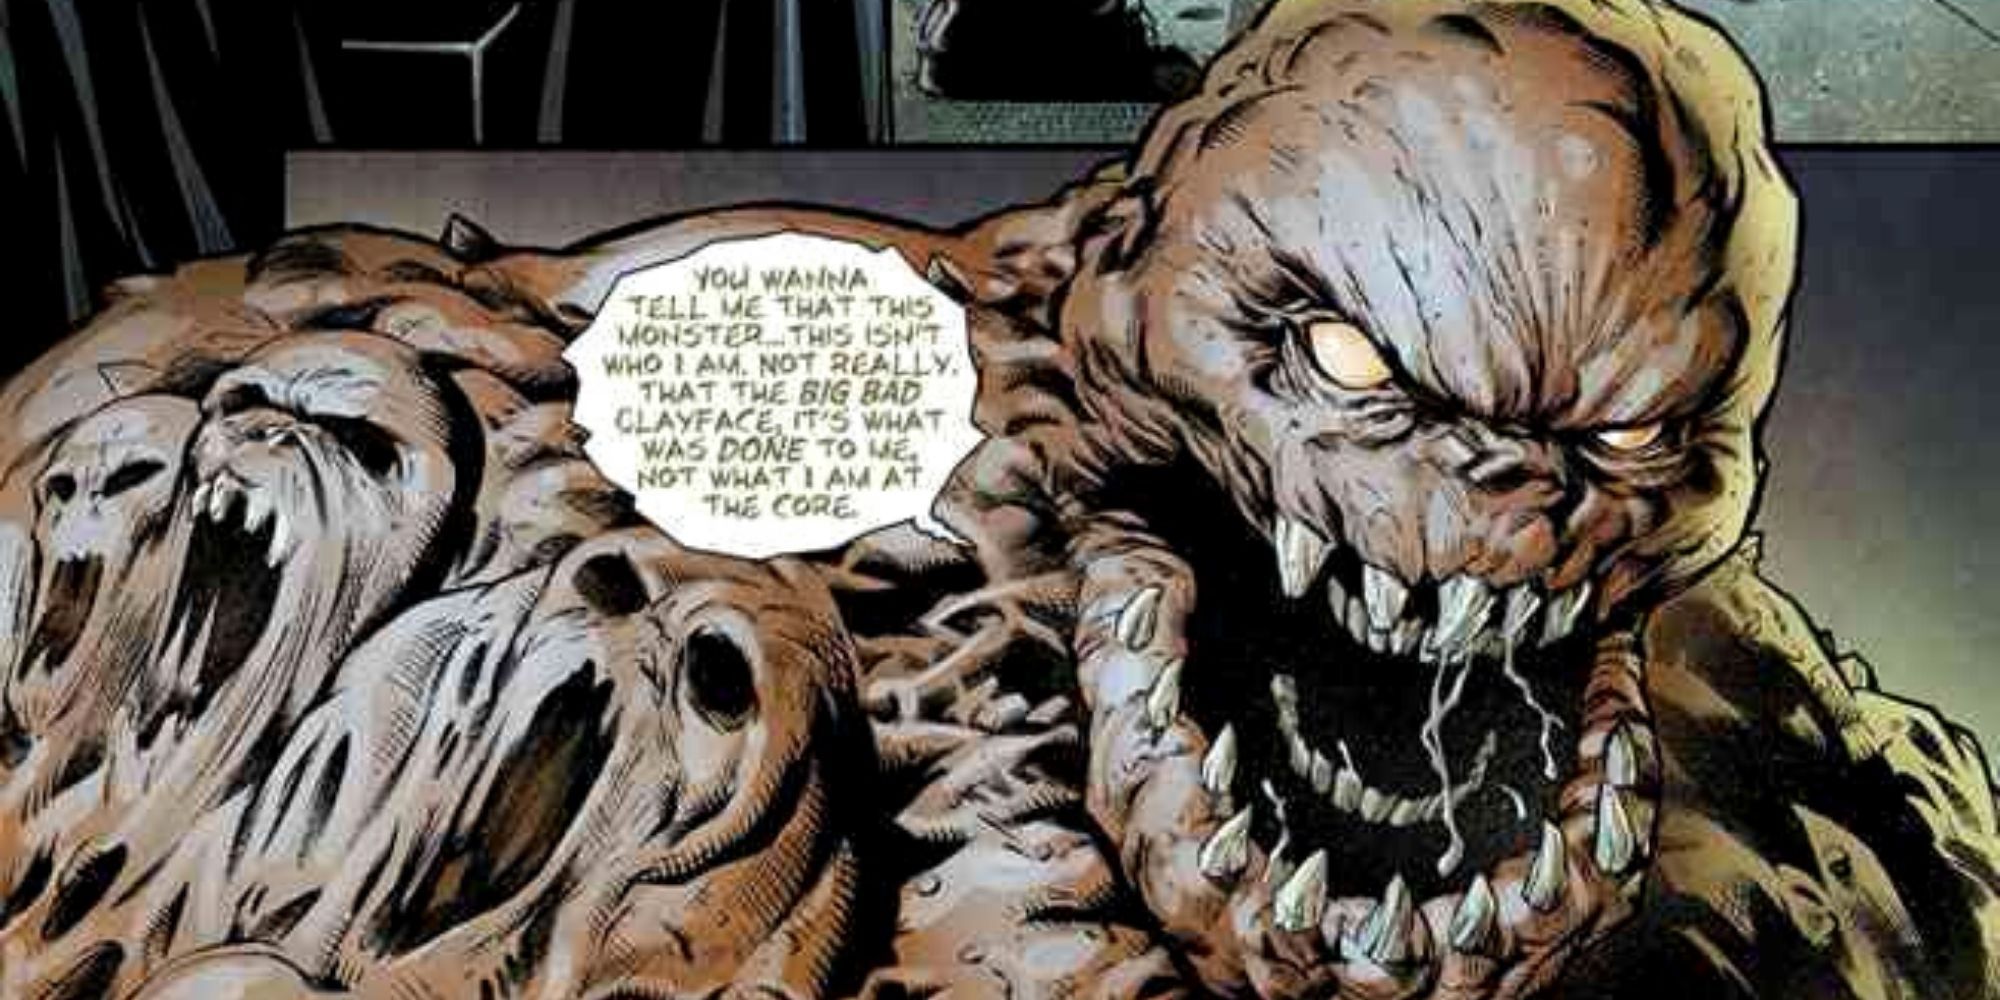 Batman's Clayface fierce mouth and teeth faces gasp on his body